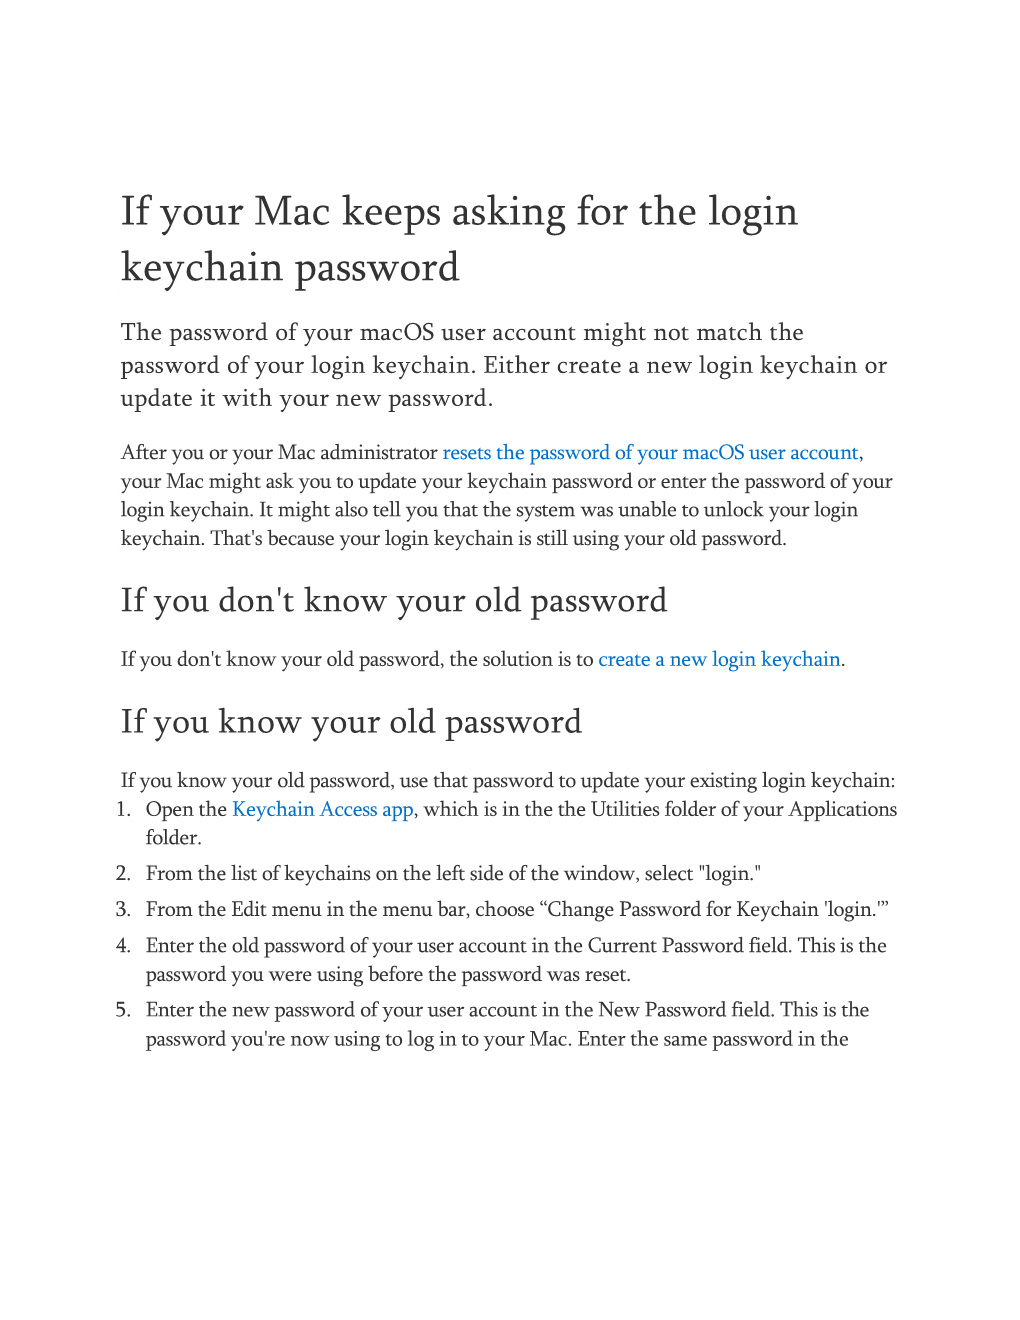 If Your Mac Keeps Asking for the Login Keychain Password